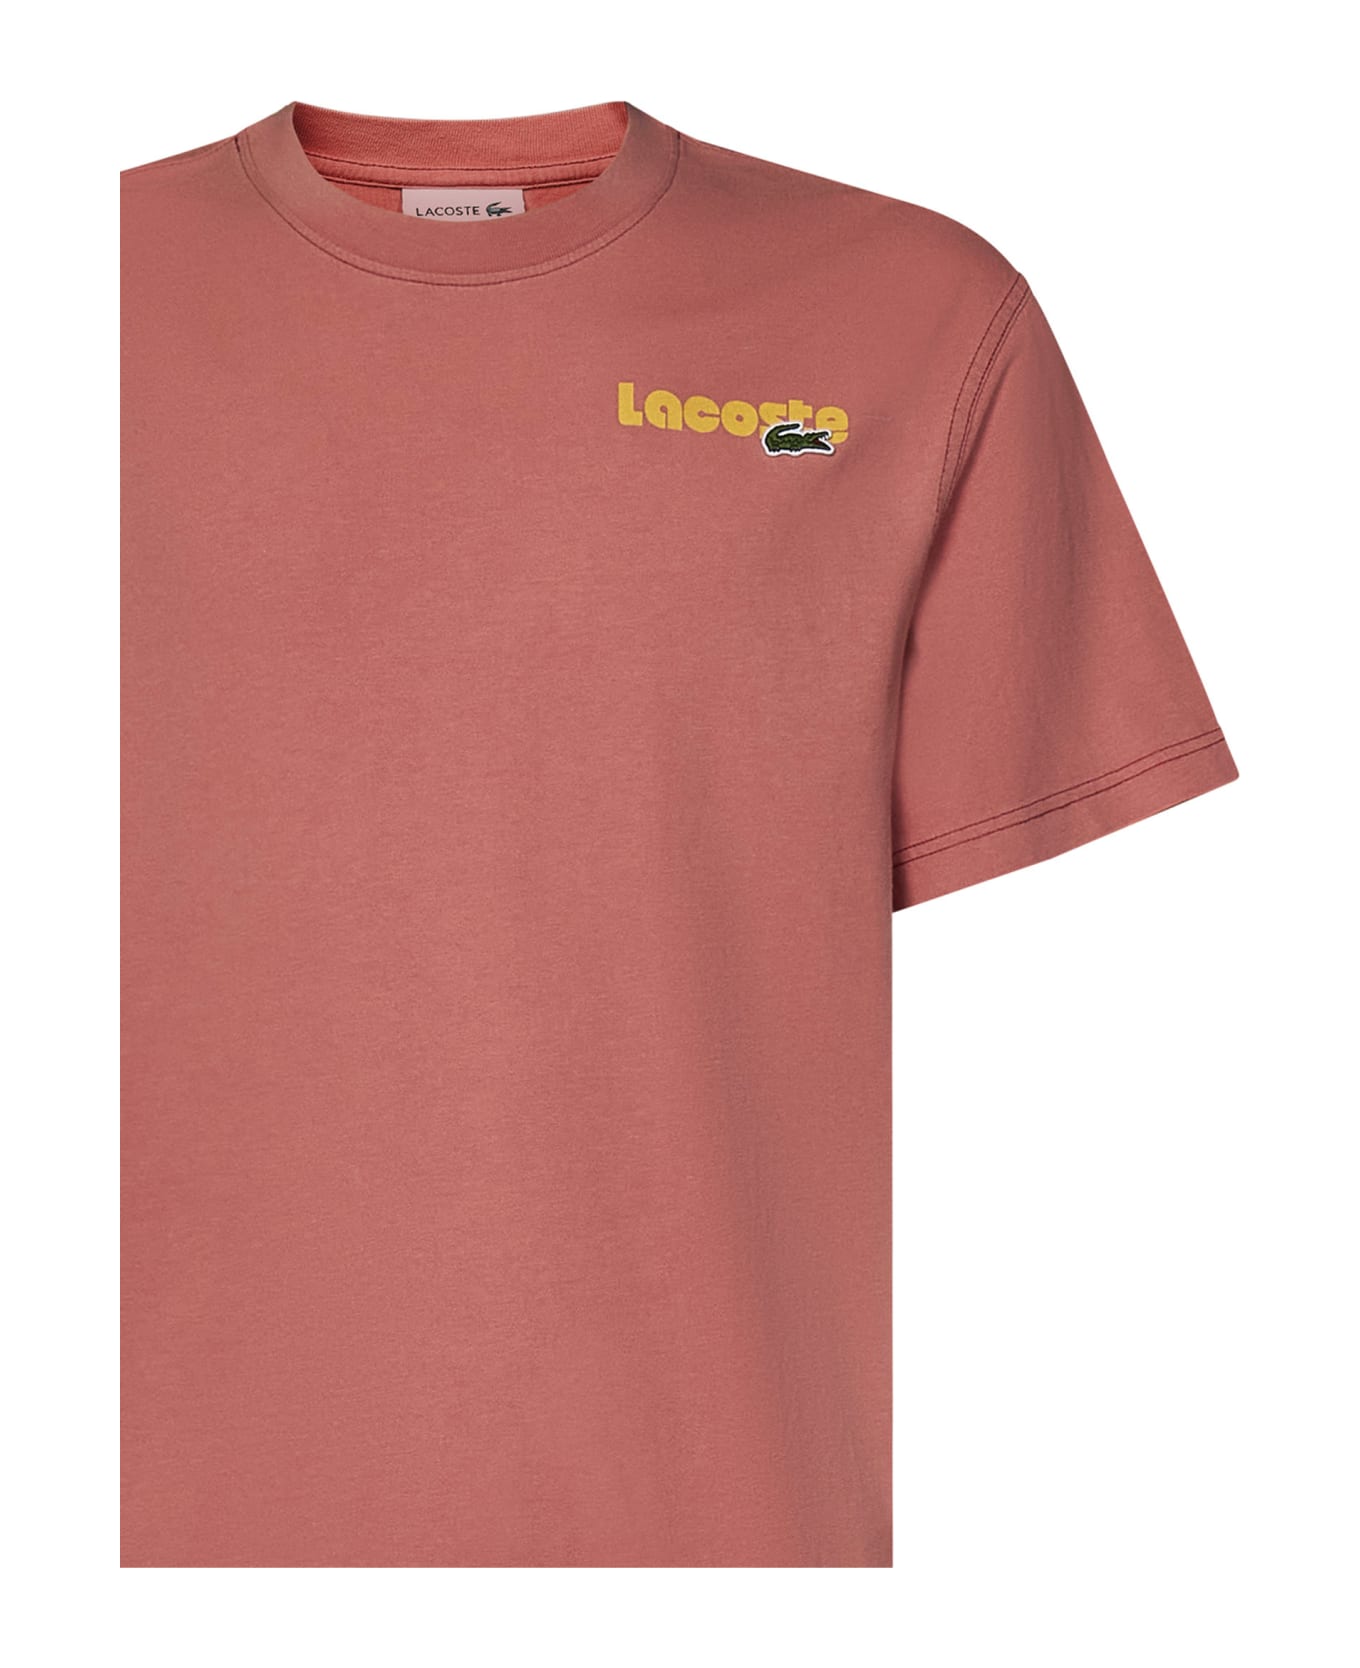 Lacoste T-shirt - Pink Tシャツ